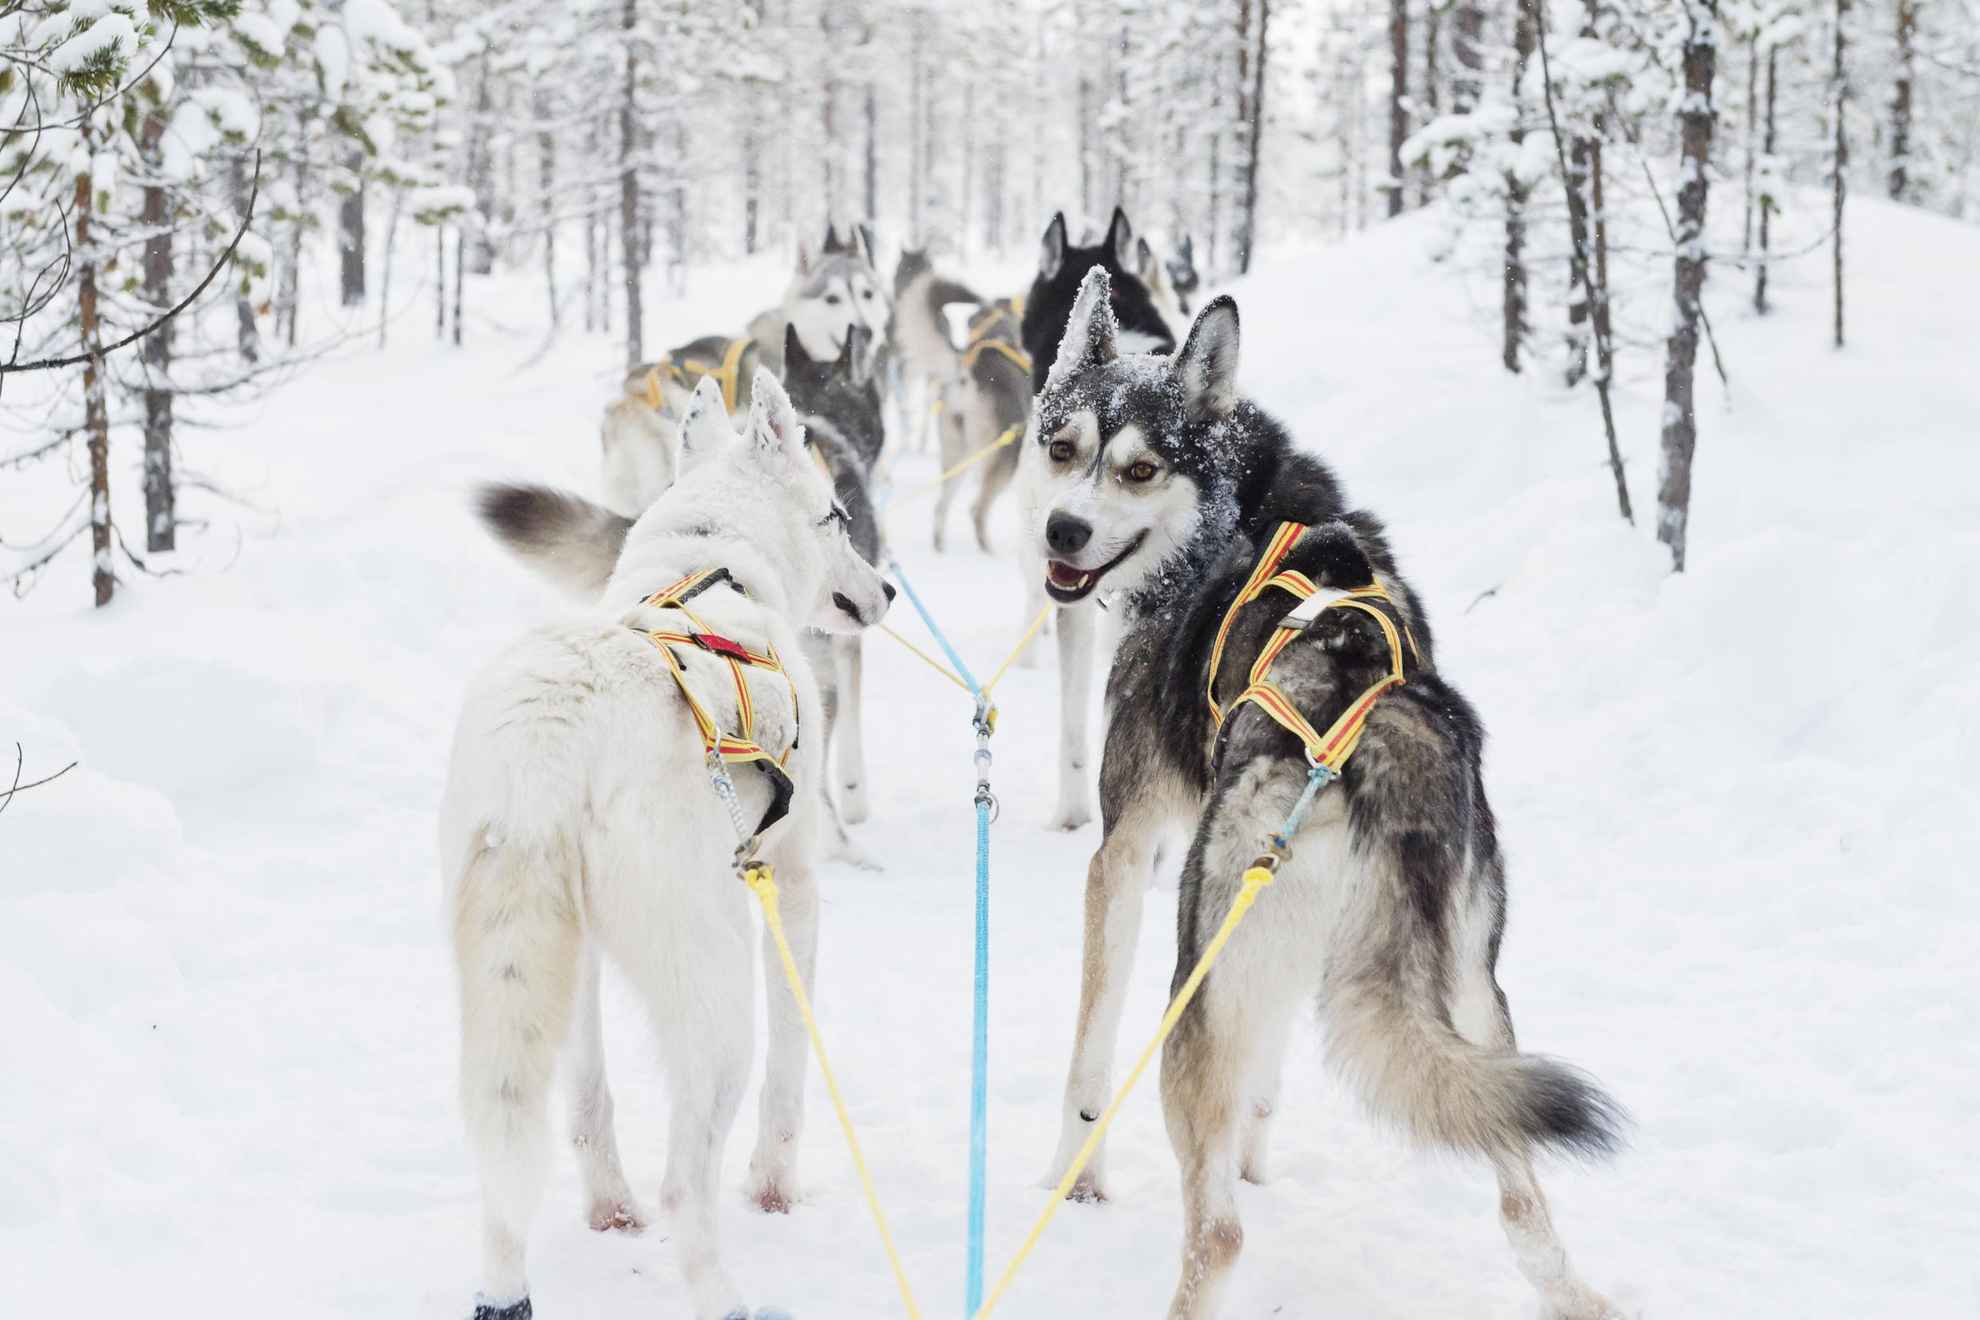 Sleddogs in the forest